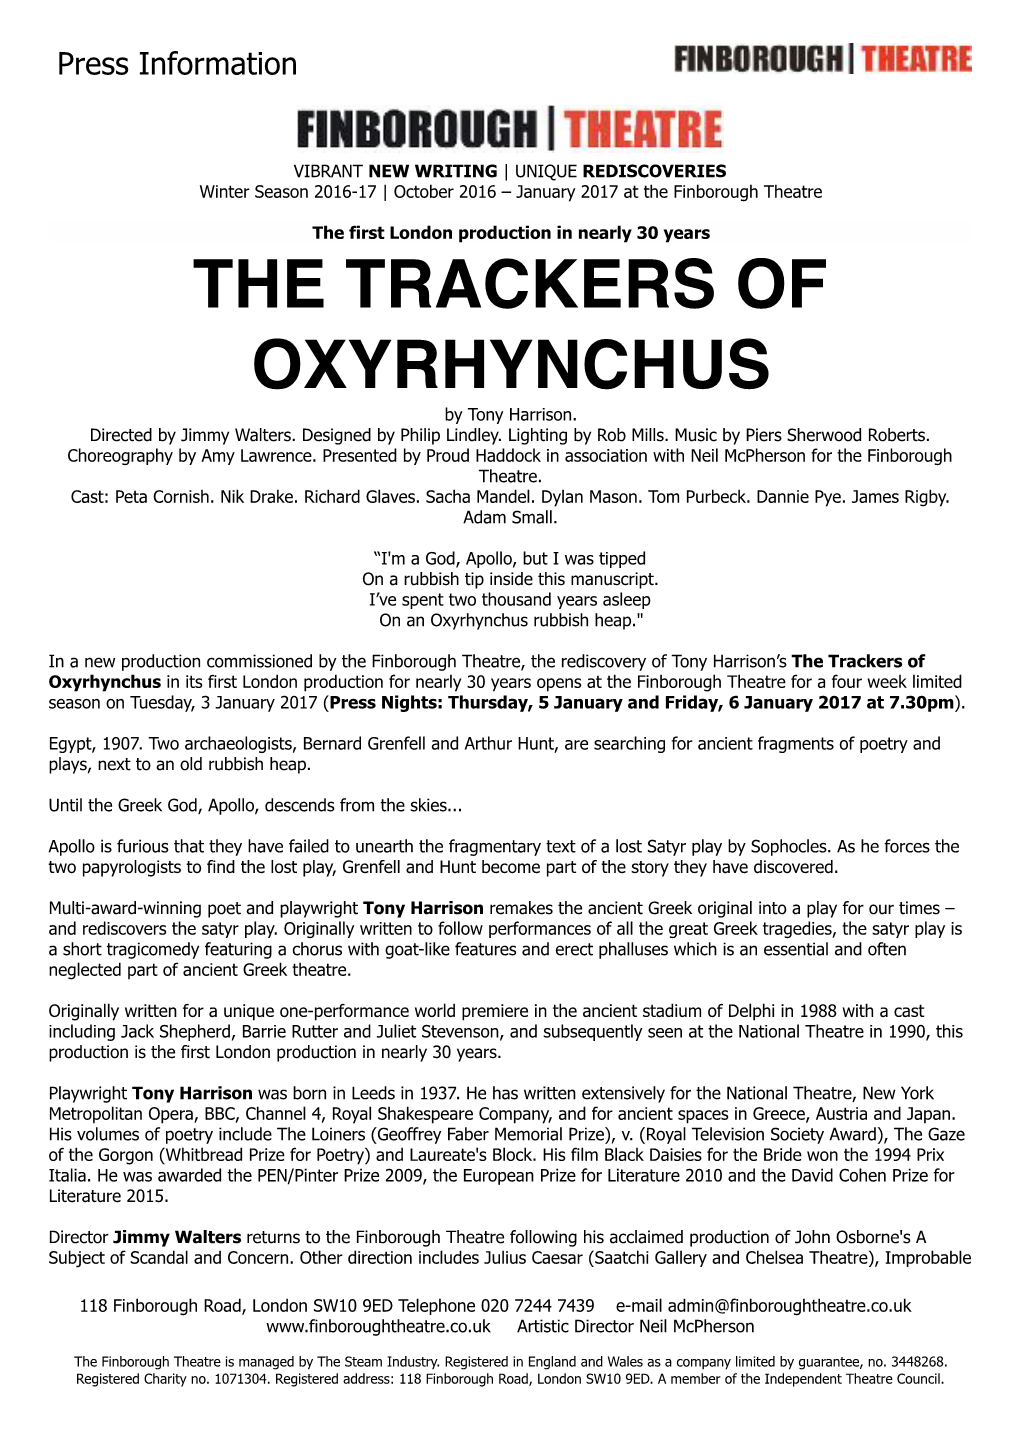 THE TRACKERS of OXYRHYNCHUS by Tony Harrison